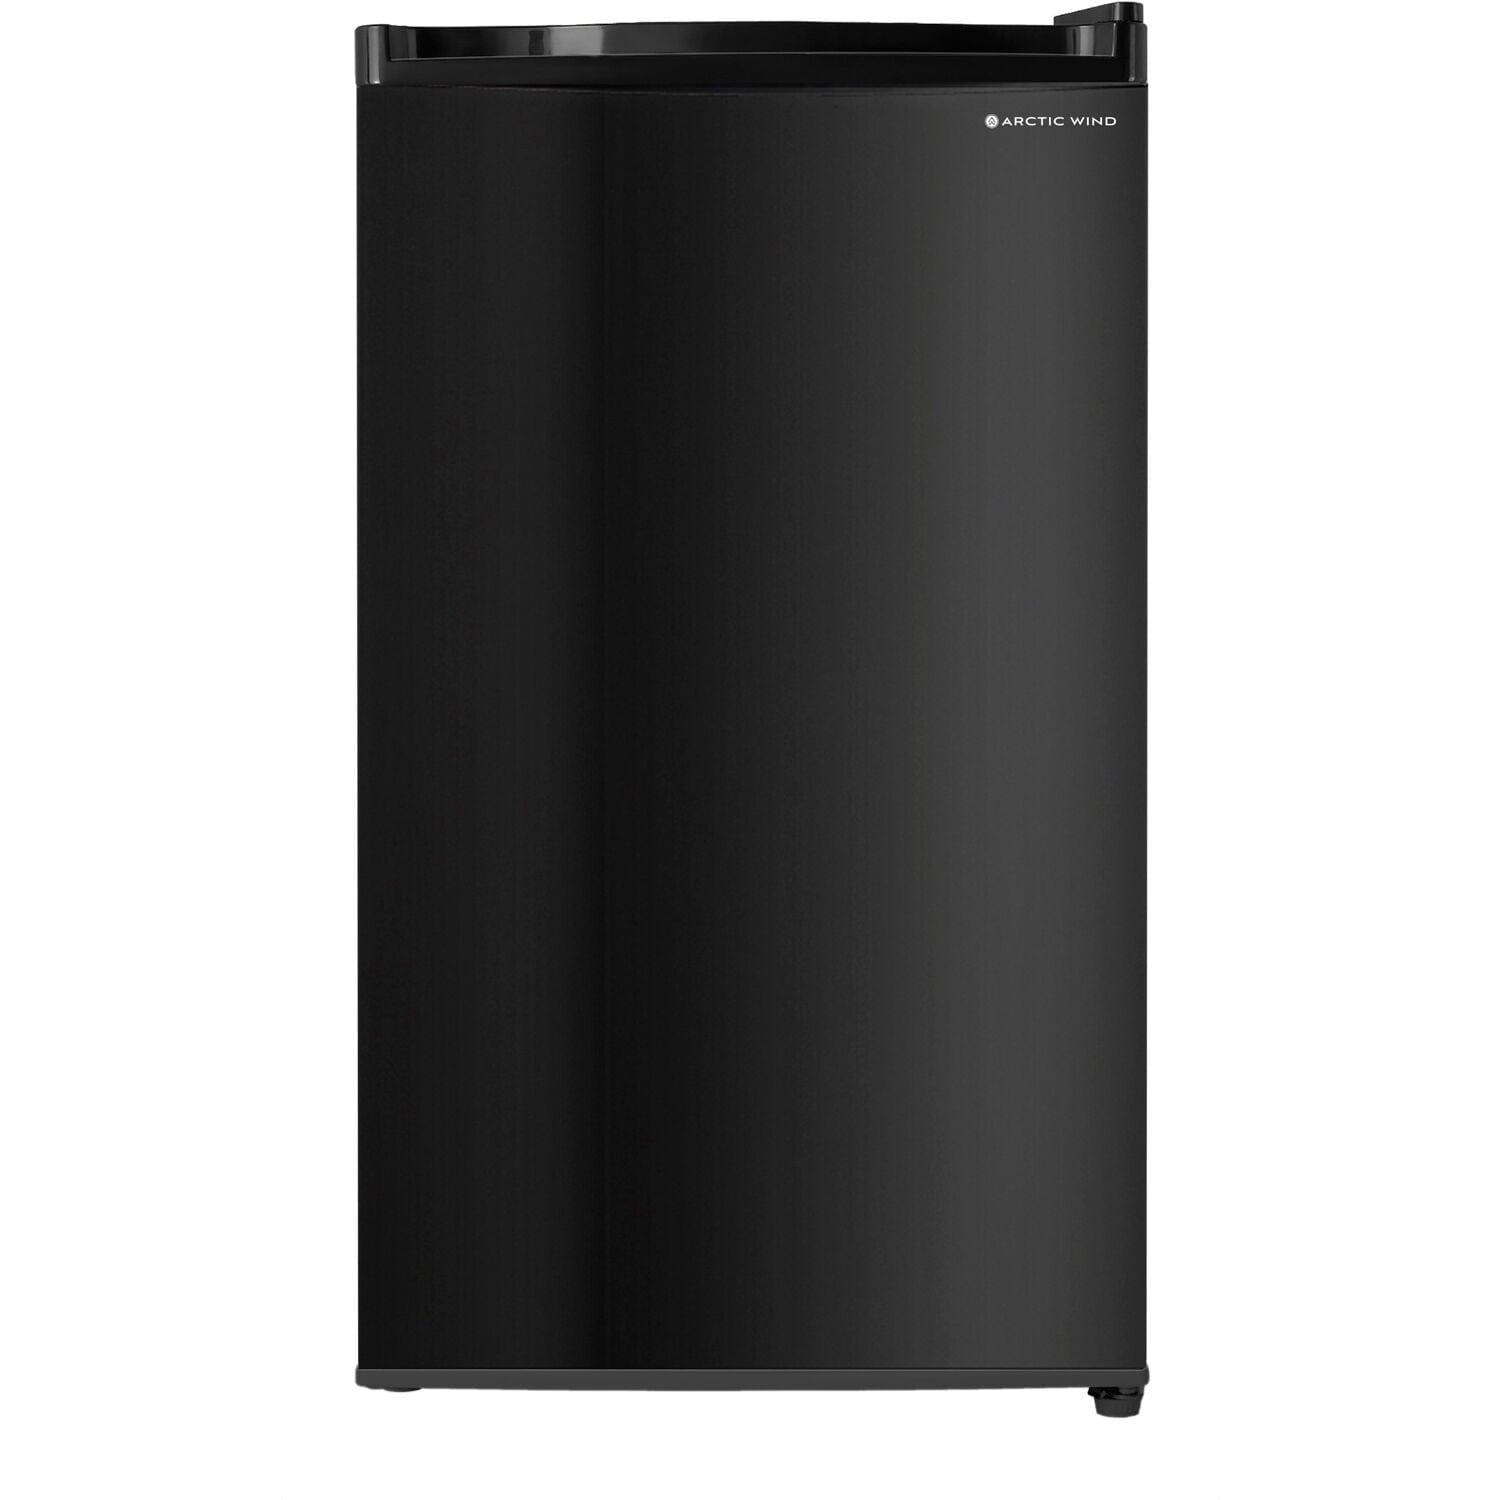 Arctic Wind Compact Refrigeration Arctic Wind 3.3-Cu. Ft. Single Door Compact Refrigerator, Black, 1AW1BF33A